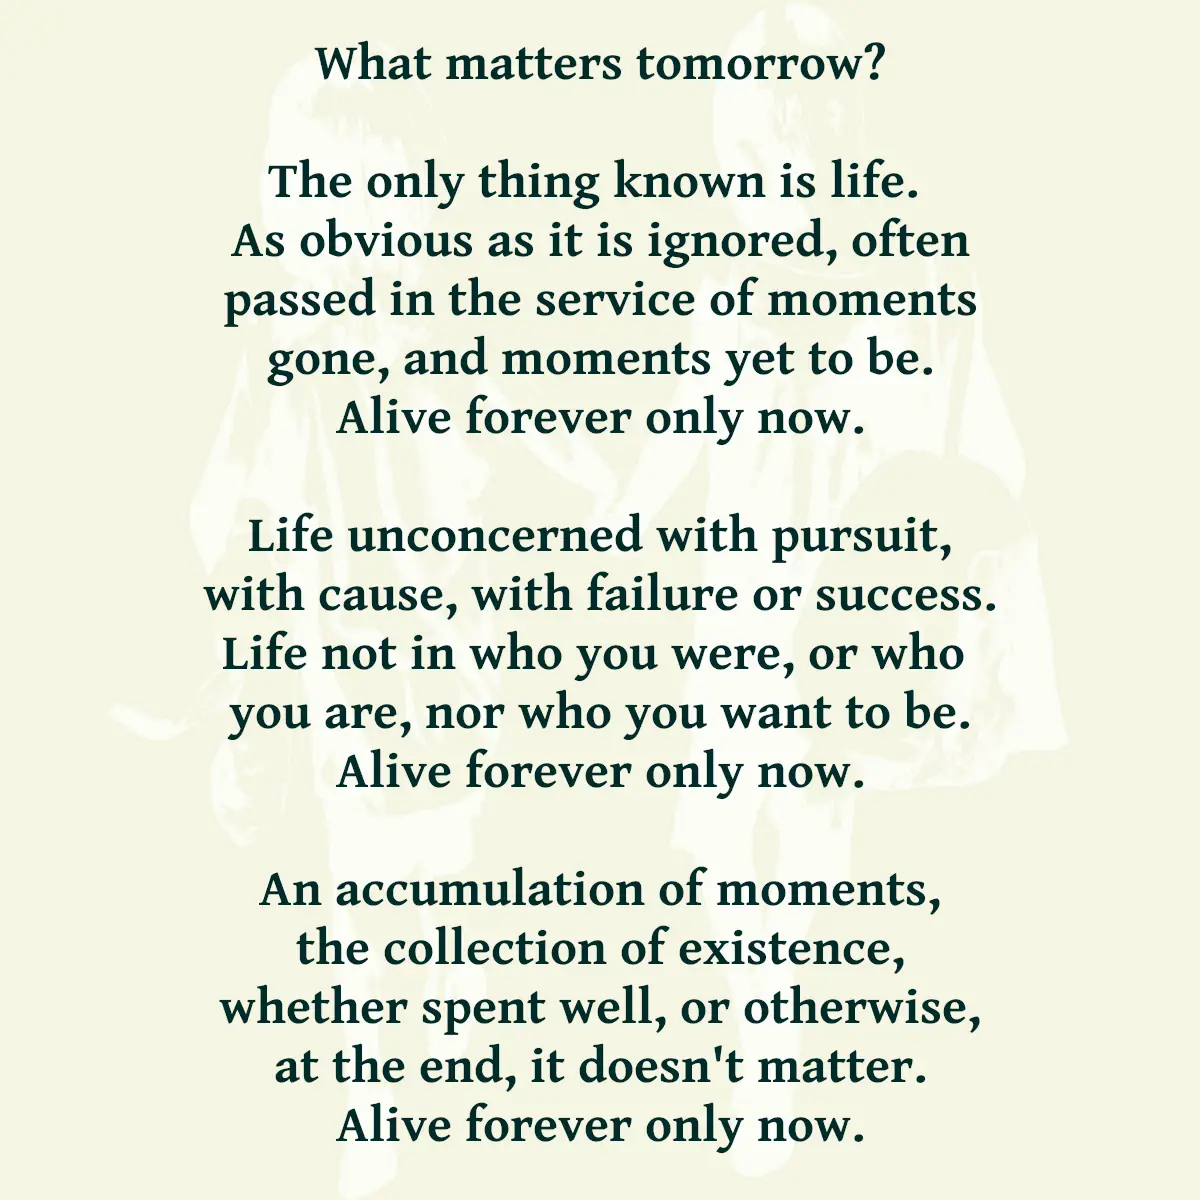 What matters tomorrow? The only thing known is life. As obvious as it is ignored, often passed in the service of moments gone, and moments yet to be. Alive forever only now. Life unconcerned with pursuit, with cause, with failure or success. Life not in who you were, or who you are, nor who you want to be. Alive forever only now. An accumulation of moments, the collection of existence, whether spent well, or otherwise, at the end, it doesn't matter. Alive forever only now.